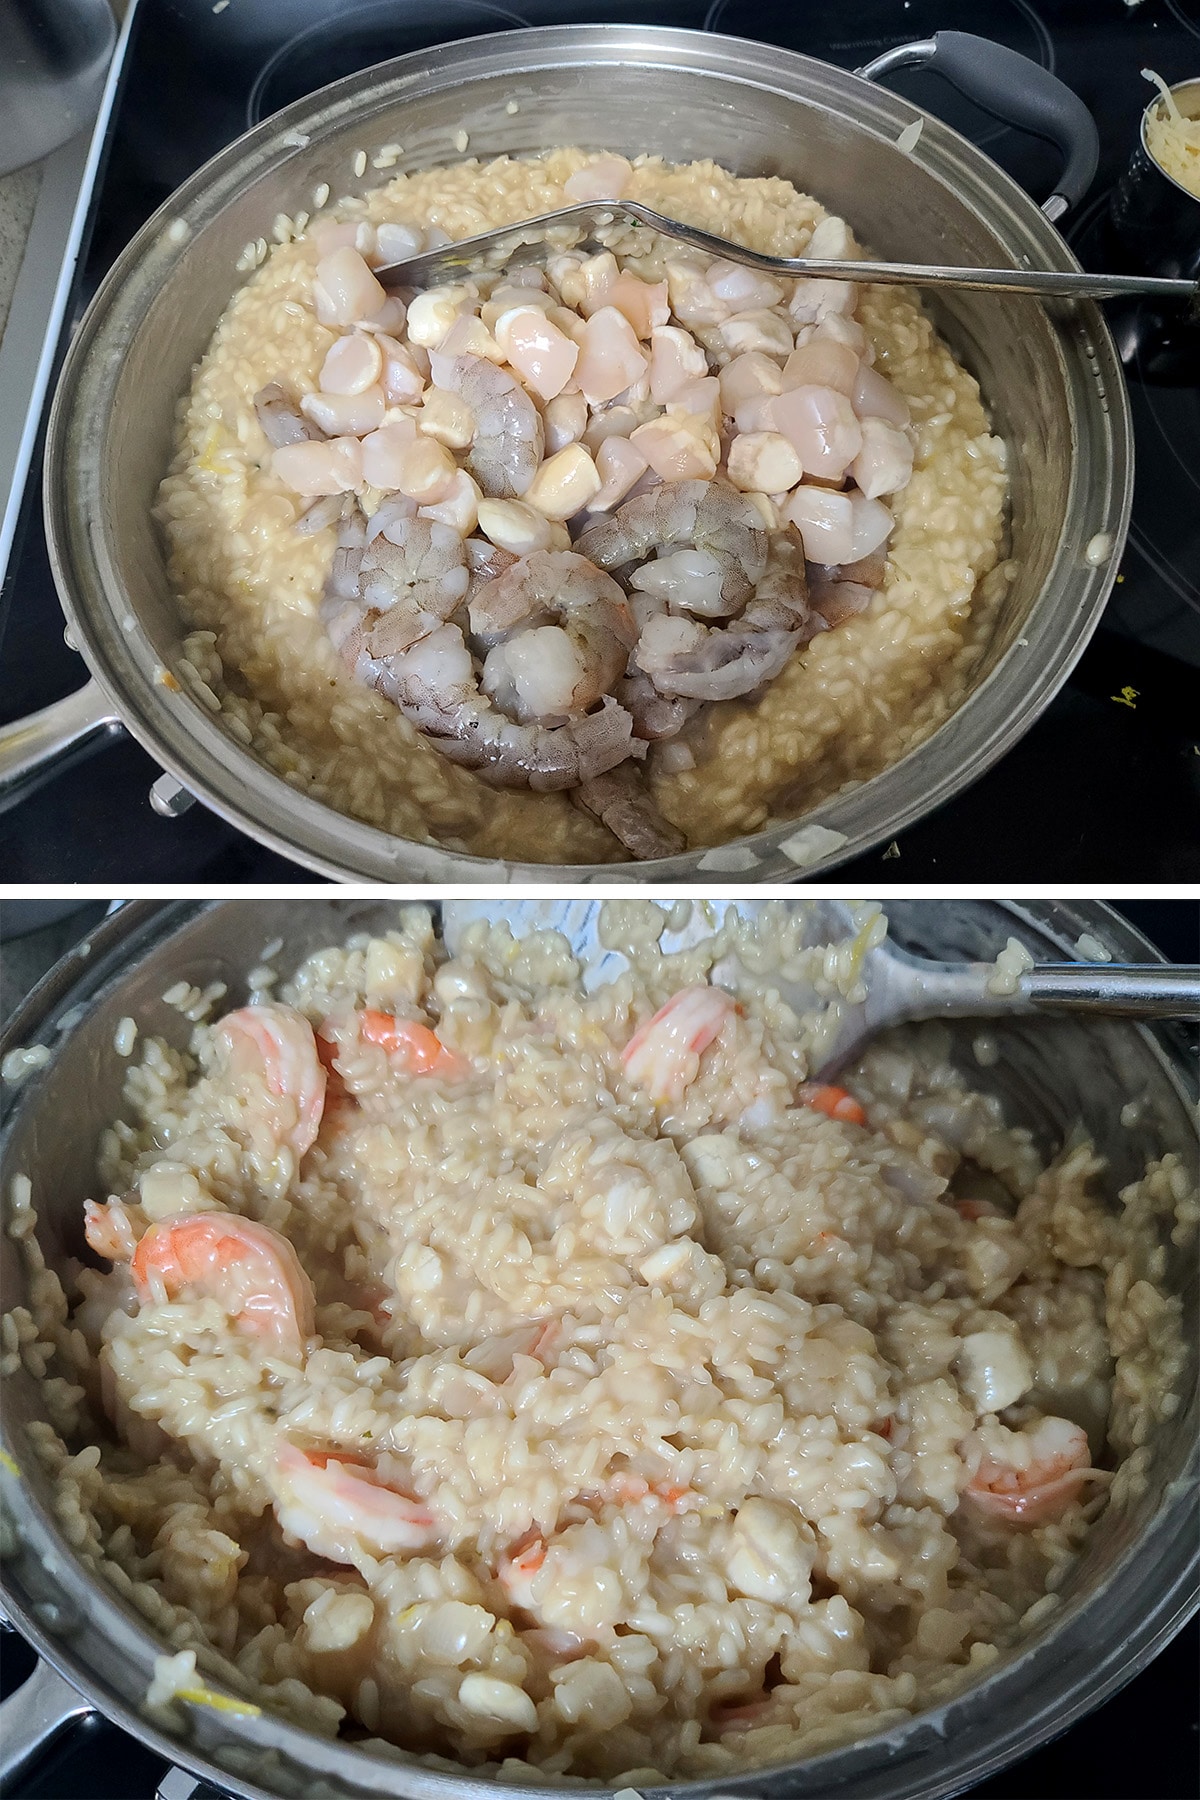 Raw shrimp and scallops being added to the pan and stirred in.